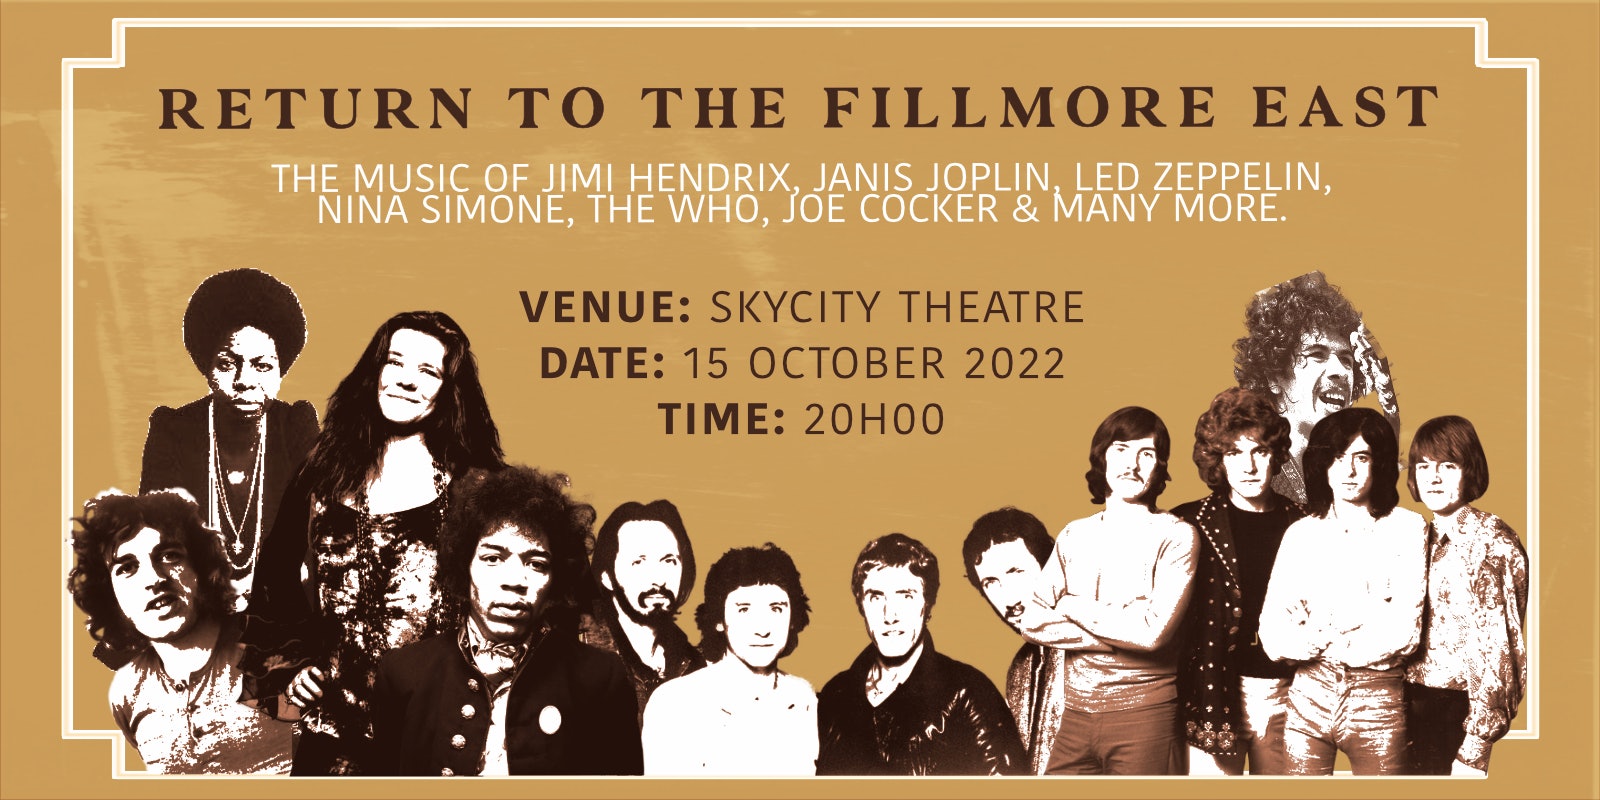 Return to the Fillmore East